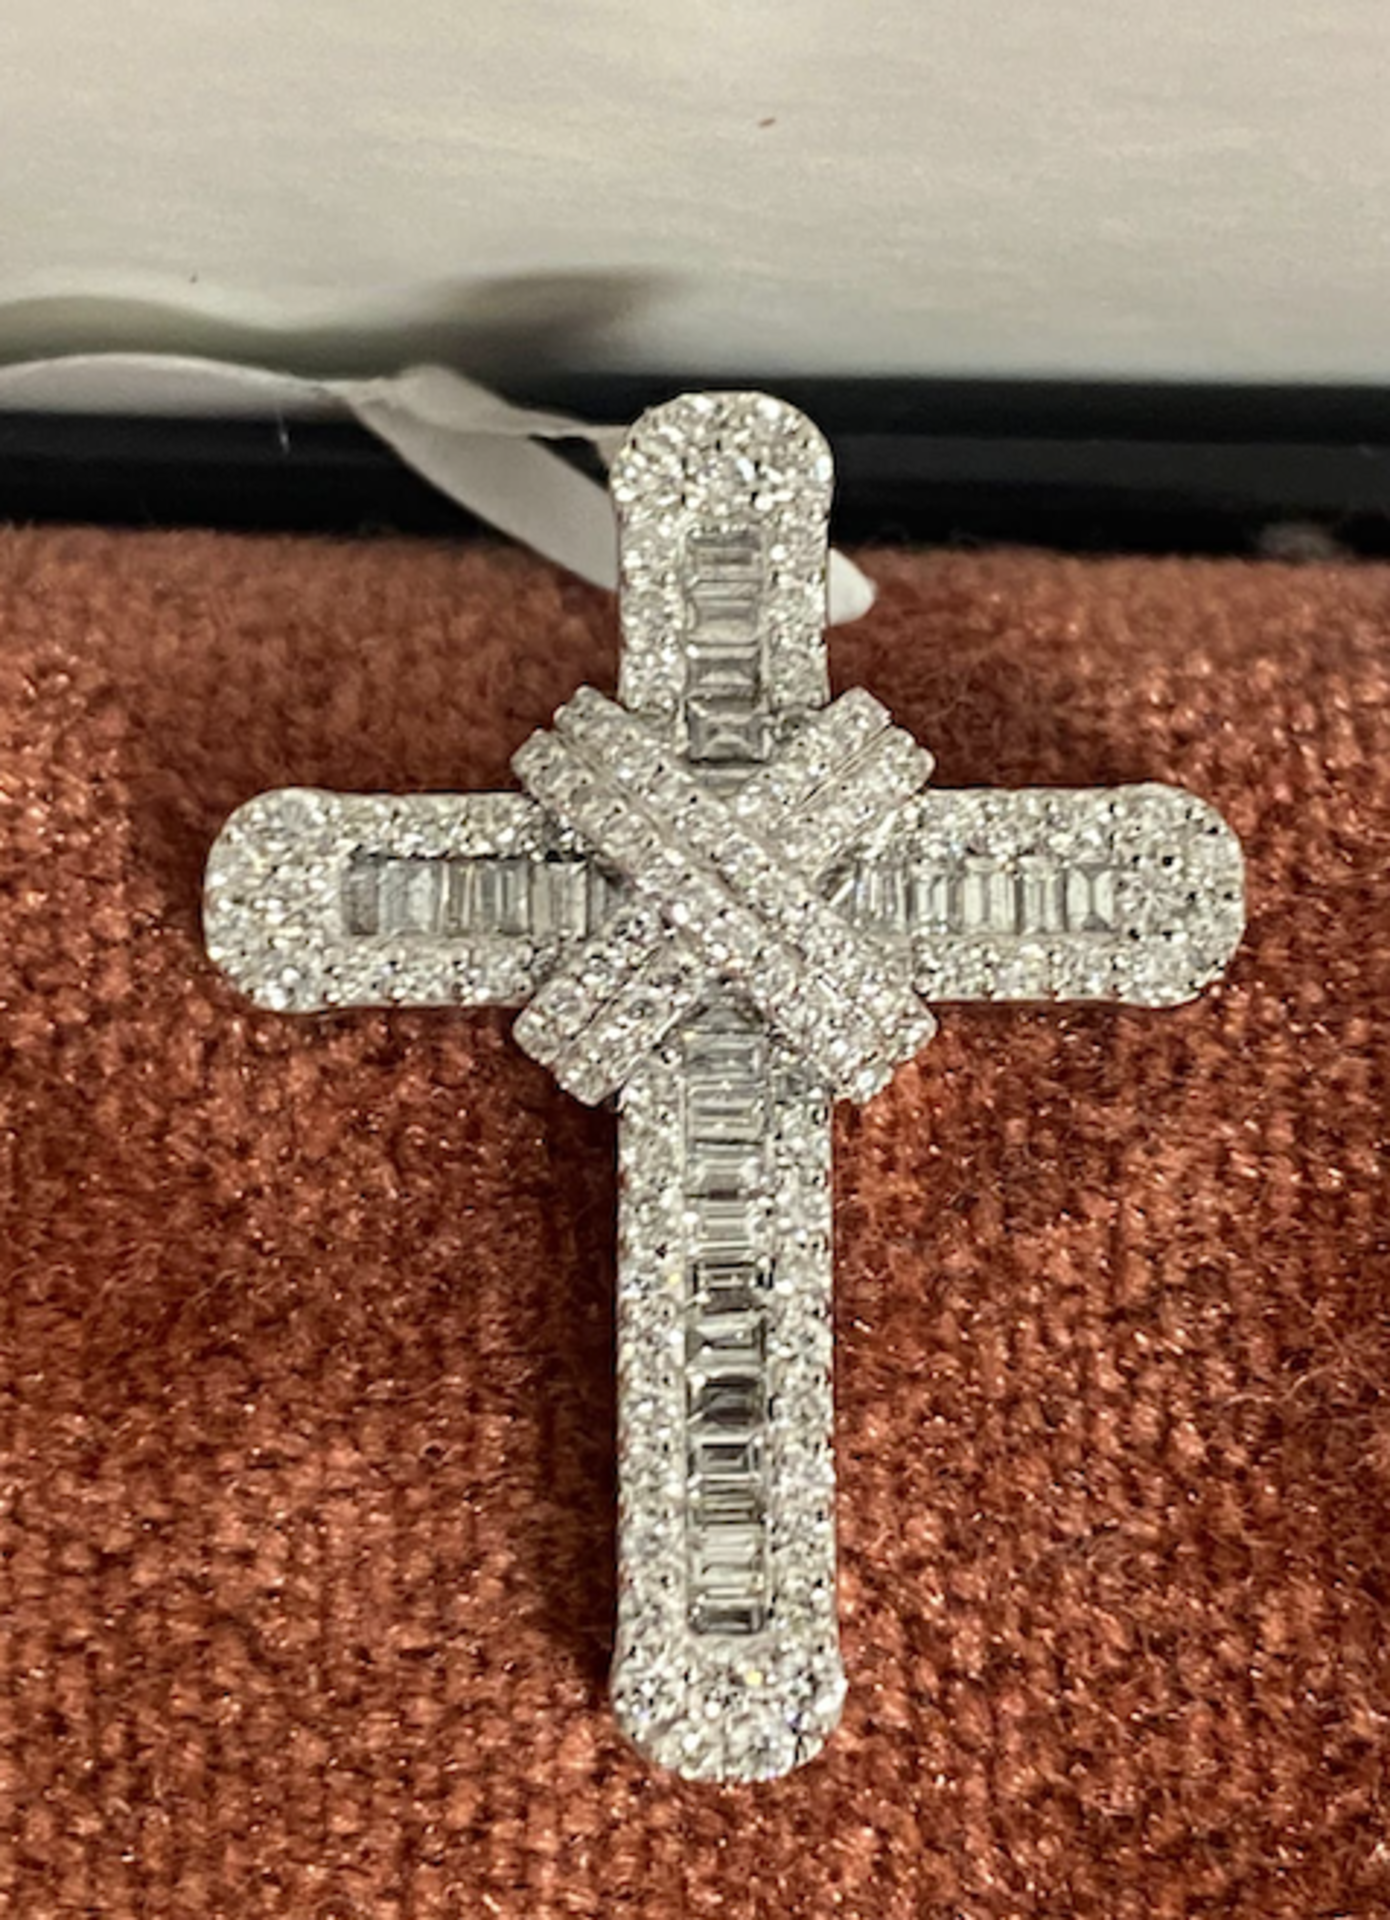 RRP £2000 Diamond Cross .78ct Diamonds. 3.85g of White Gold. Size 26mm by 20mm (Appraisals Available - Image 2 of 2